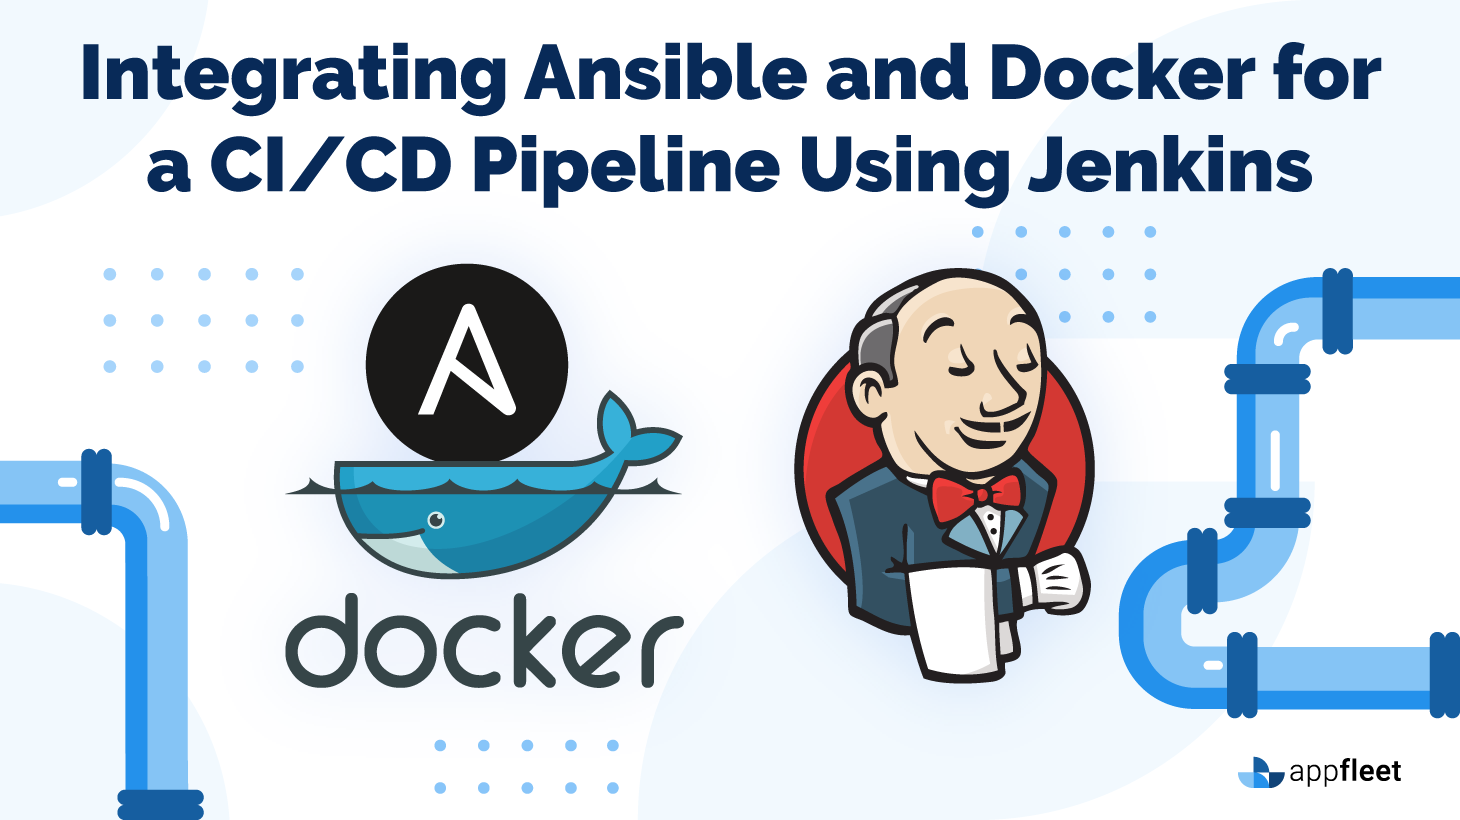 Integrating Ansible and Docker for a CI/CD Pipeline Using Jenkins